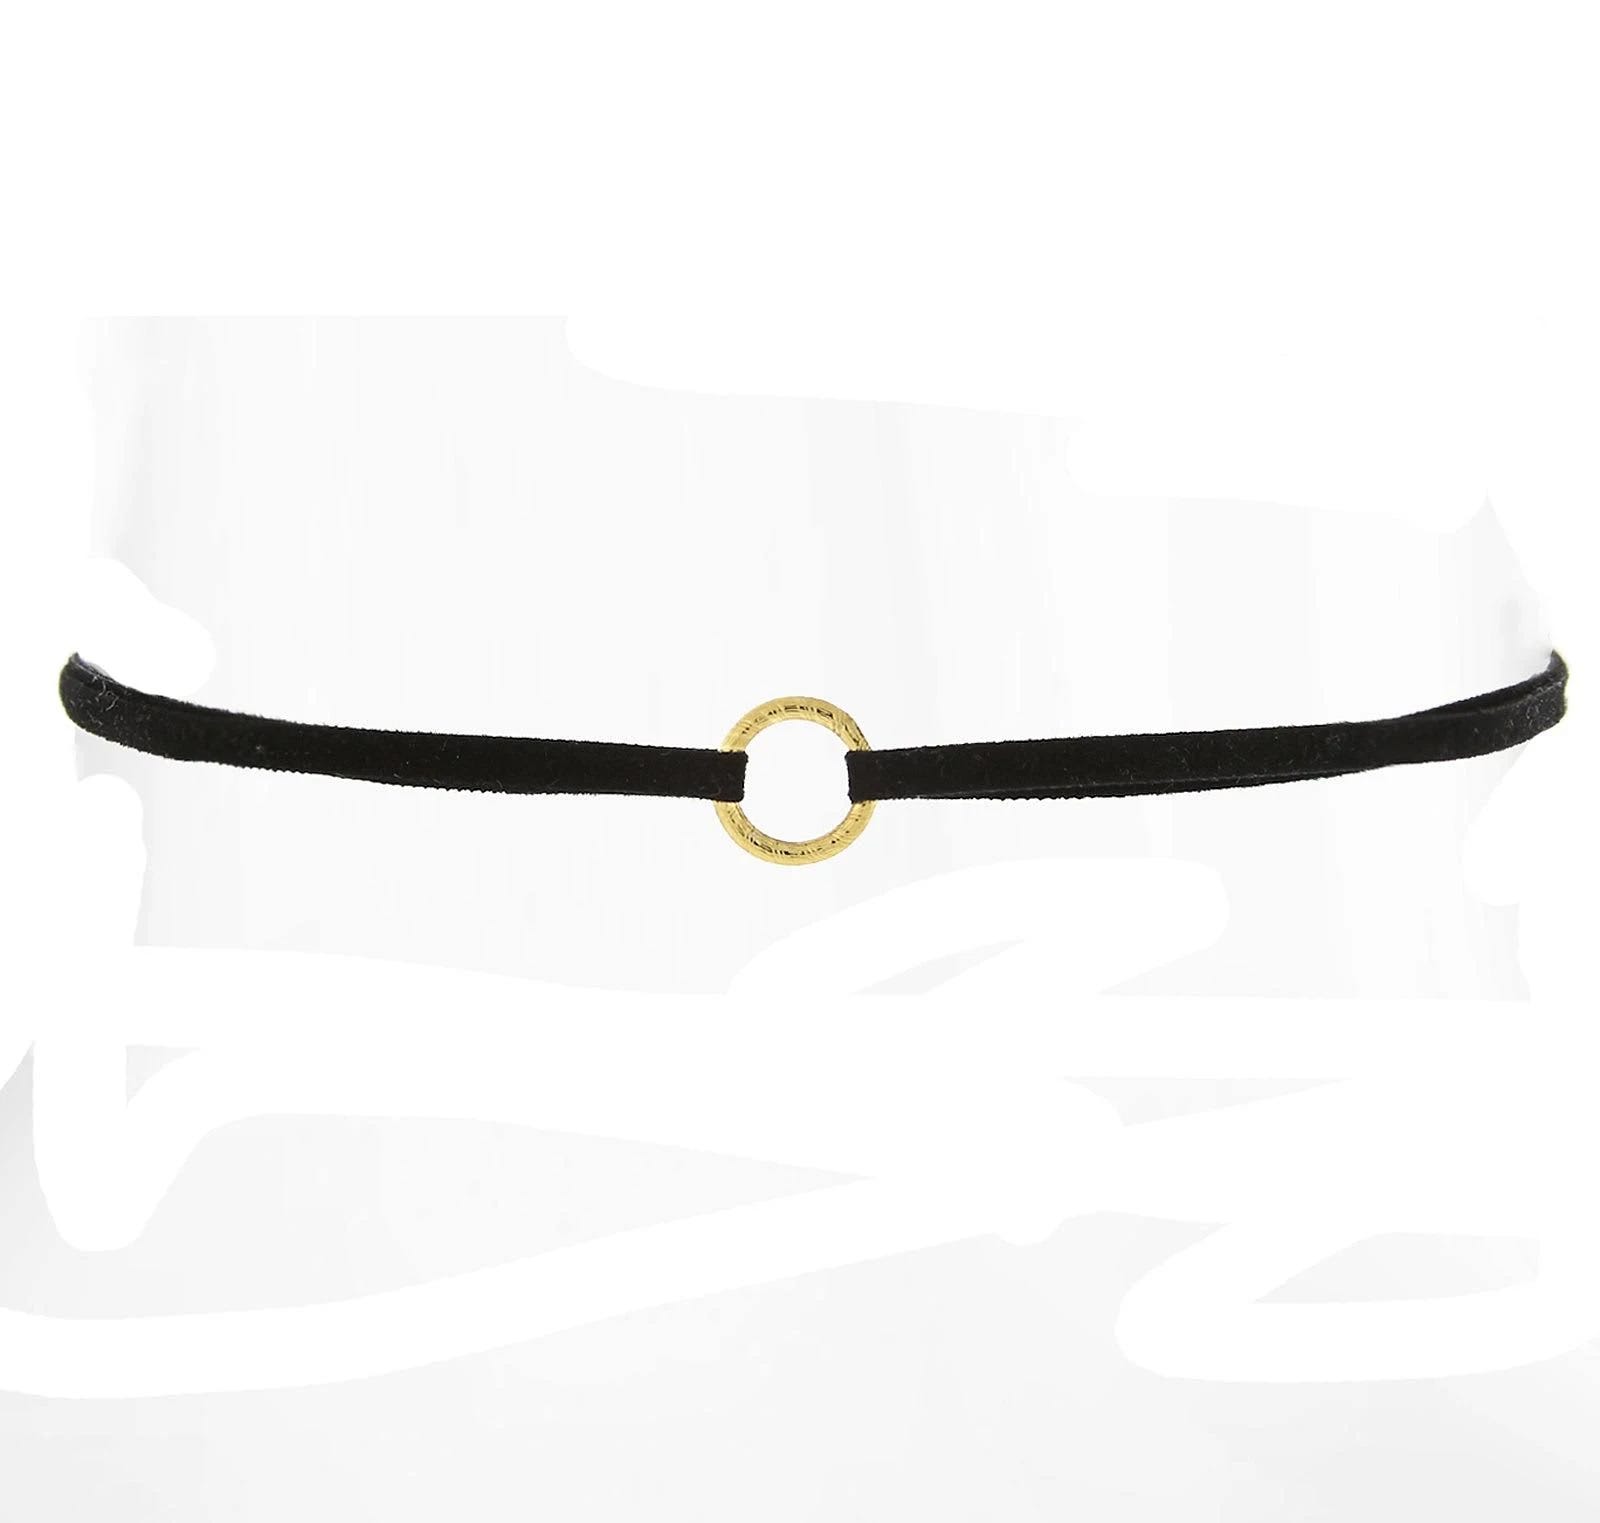 Velvet Choker with Ring Necklace for Everyday Style | Image